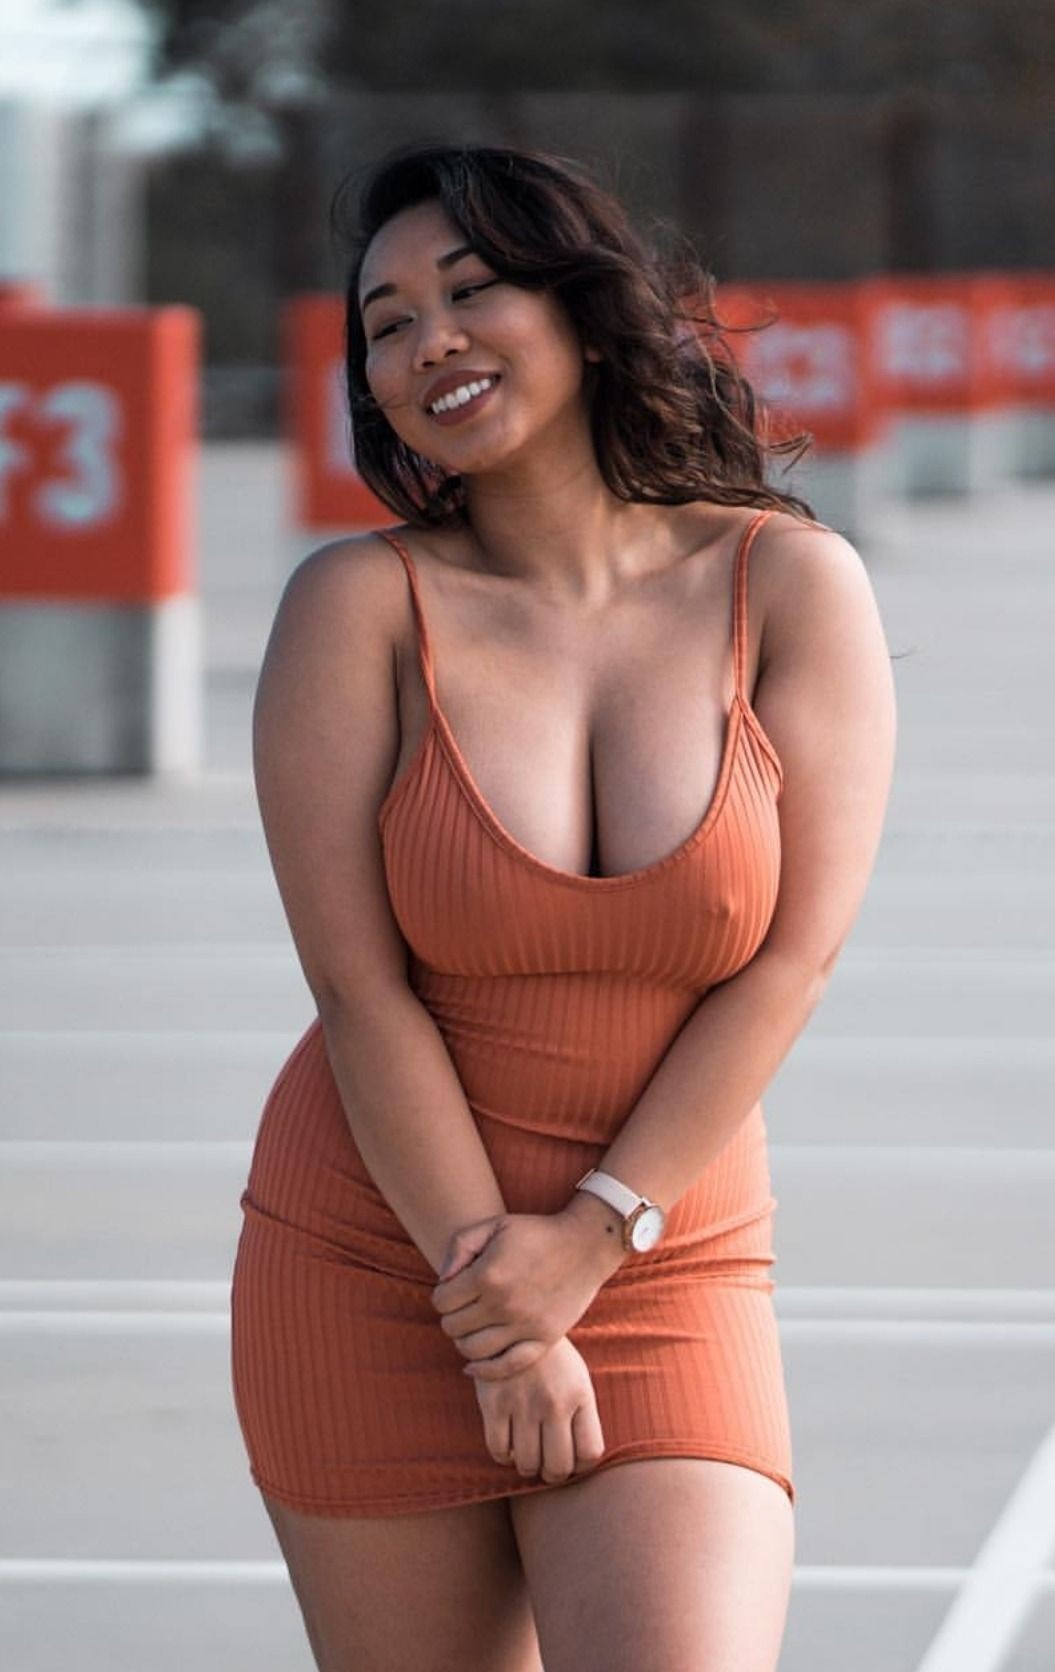 Hot curvy thick black girls with big boobs on pinterest